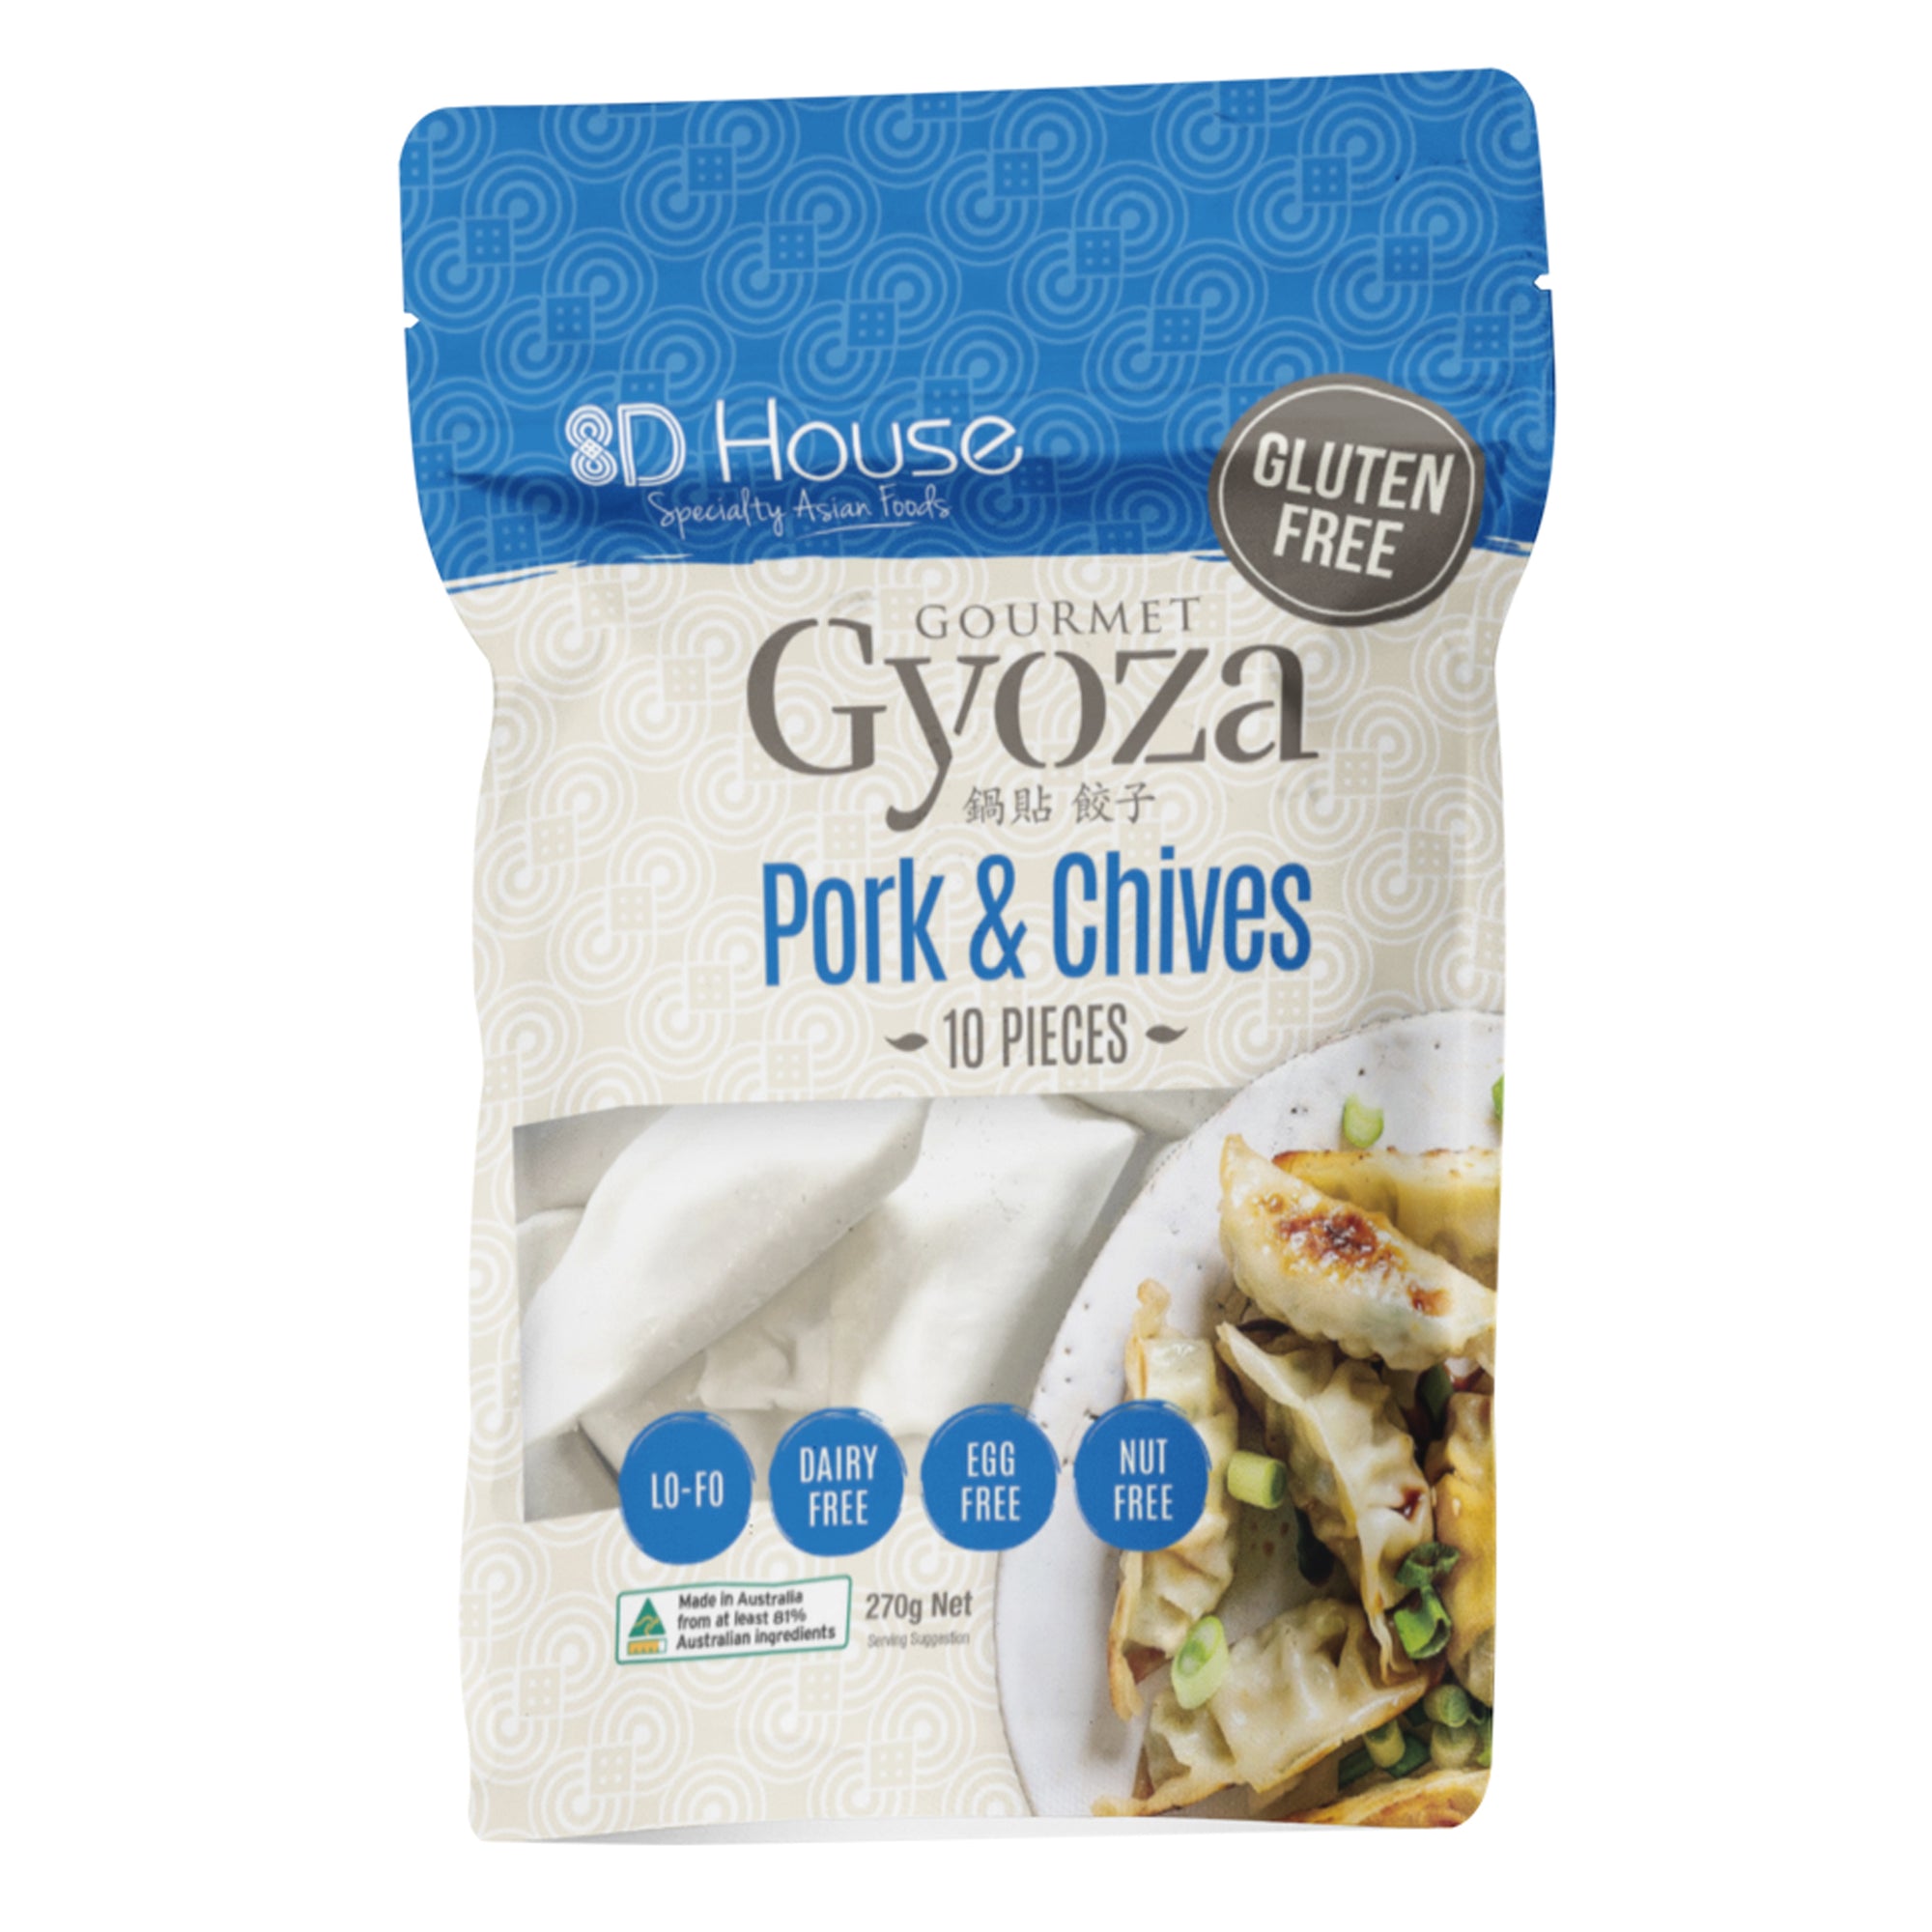 Gourmet Gyozas Pork and Chives 10